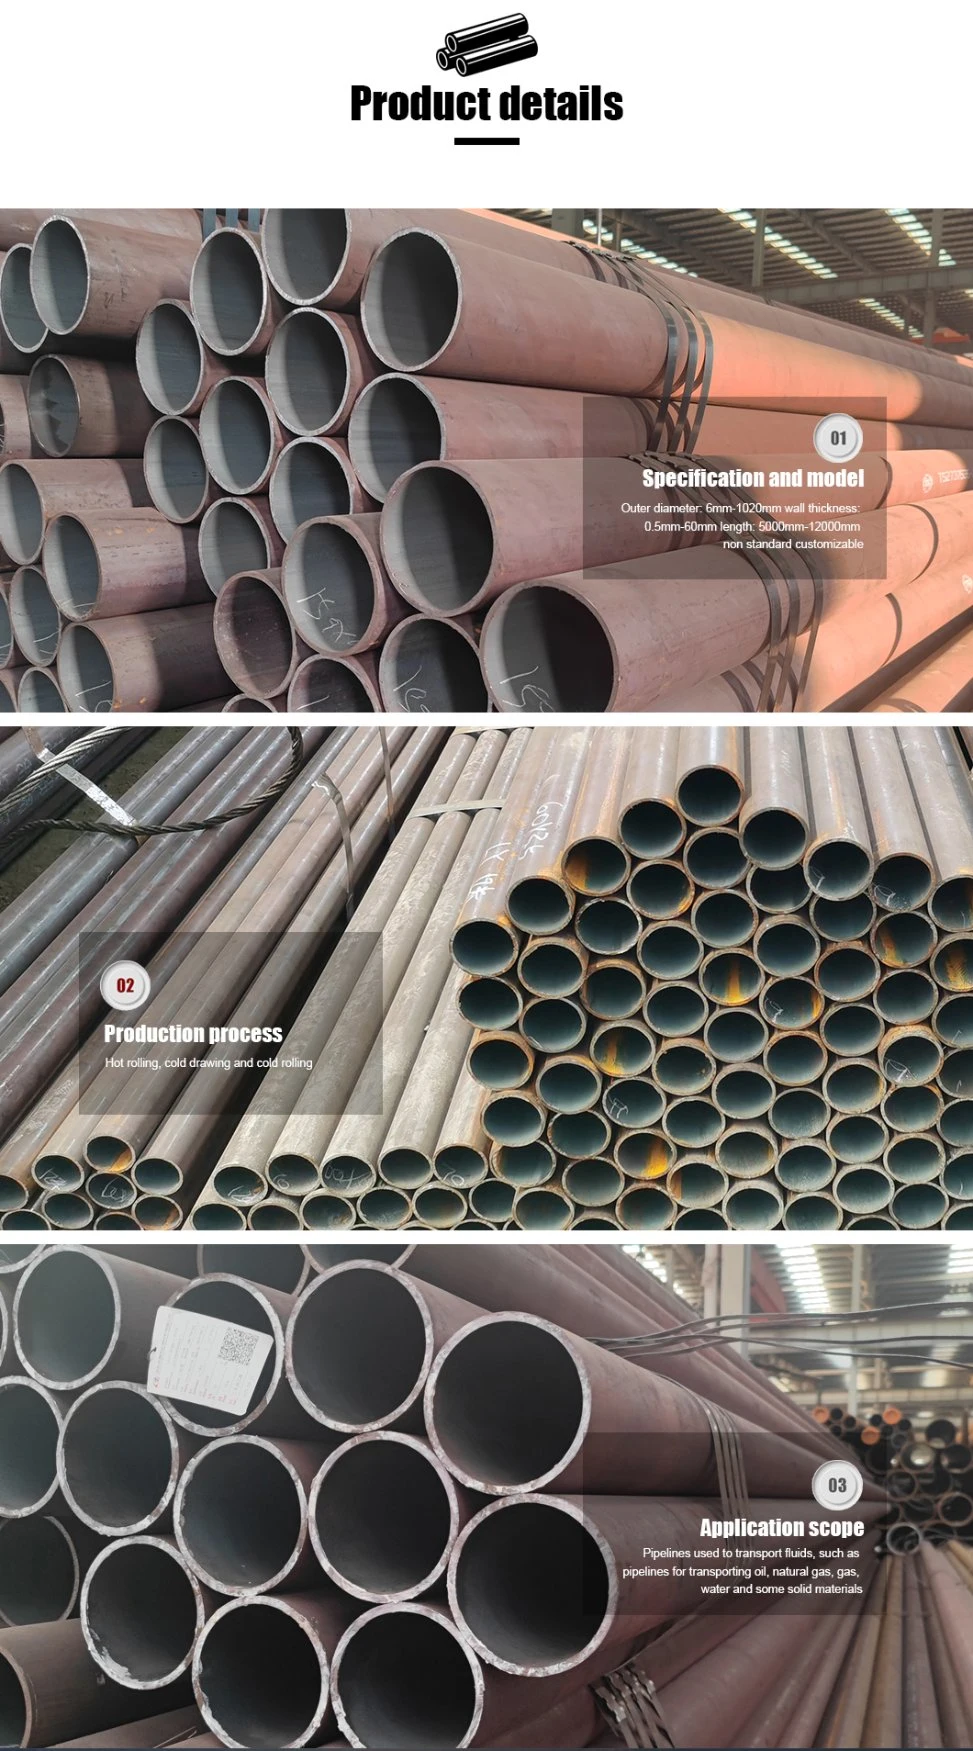 A333 Low Temperature Alloy Steel Pipe Seamless Steel Pipes